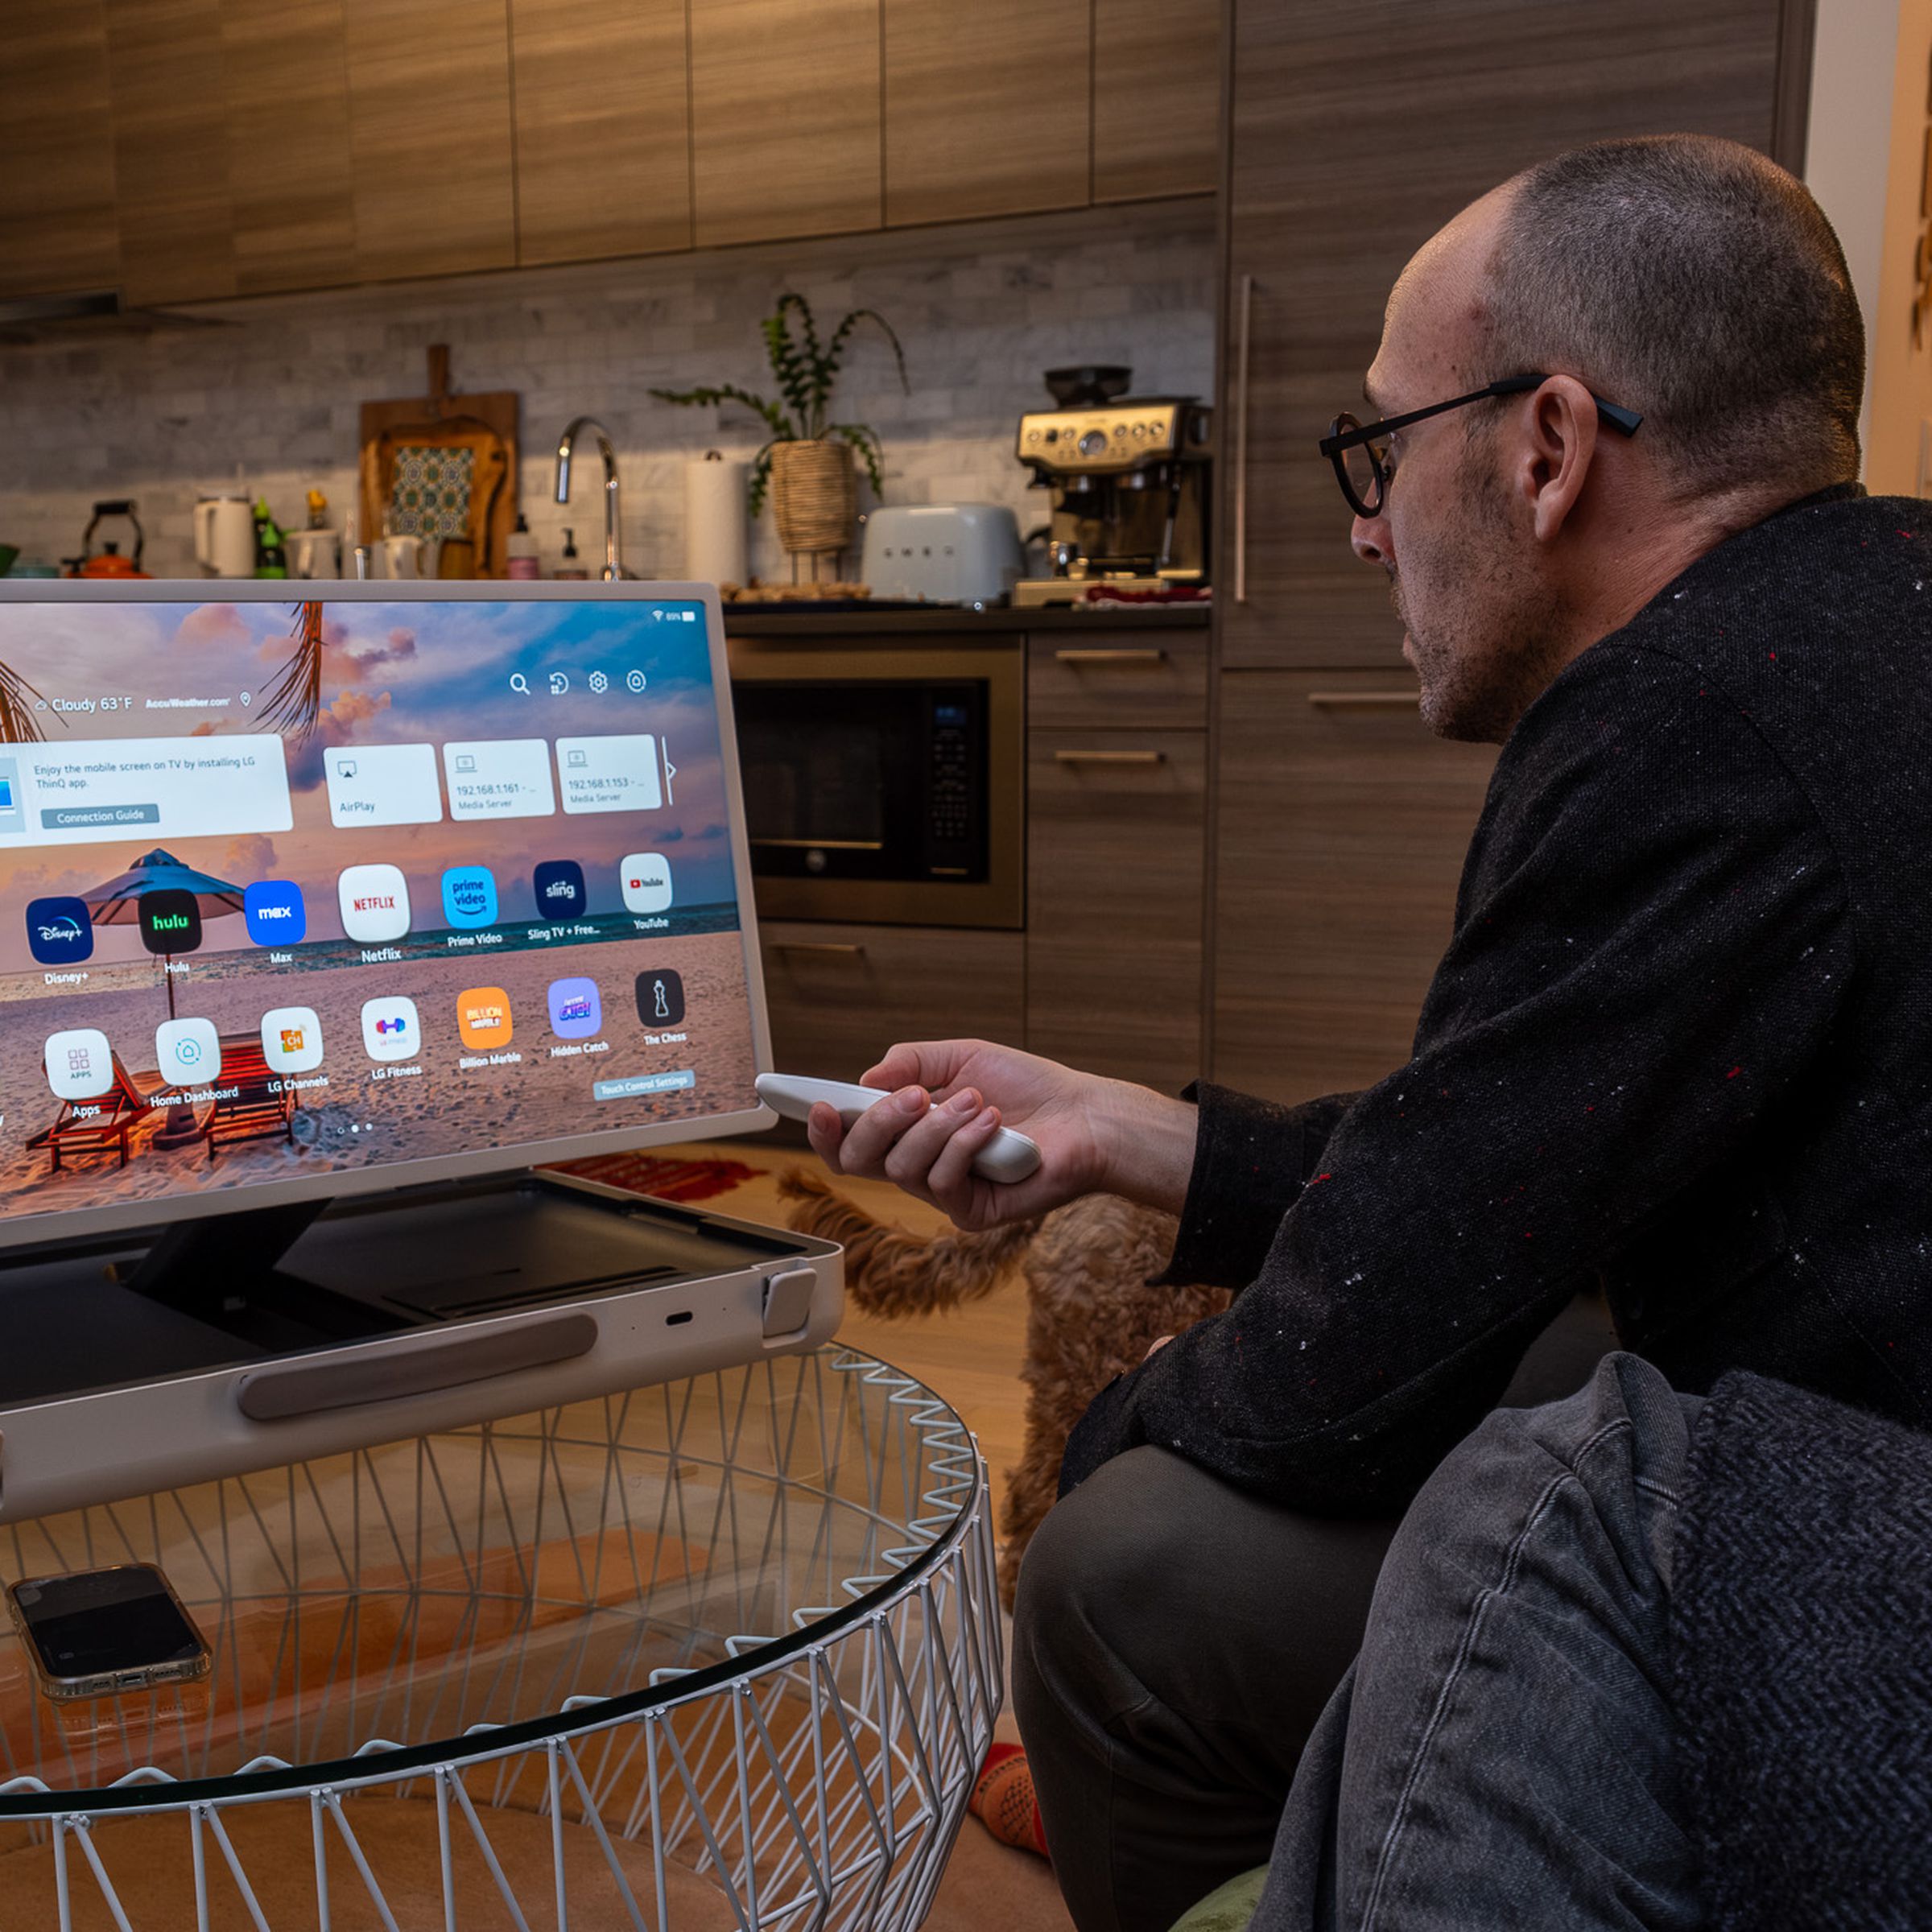 A photo of a man leaning over on a couch and using LG’s StanbyME Go briefcase TV.